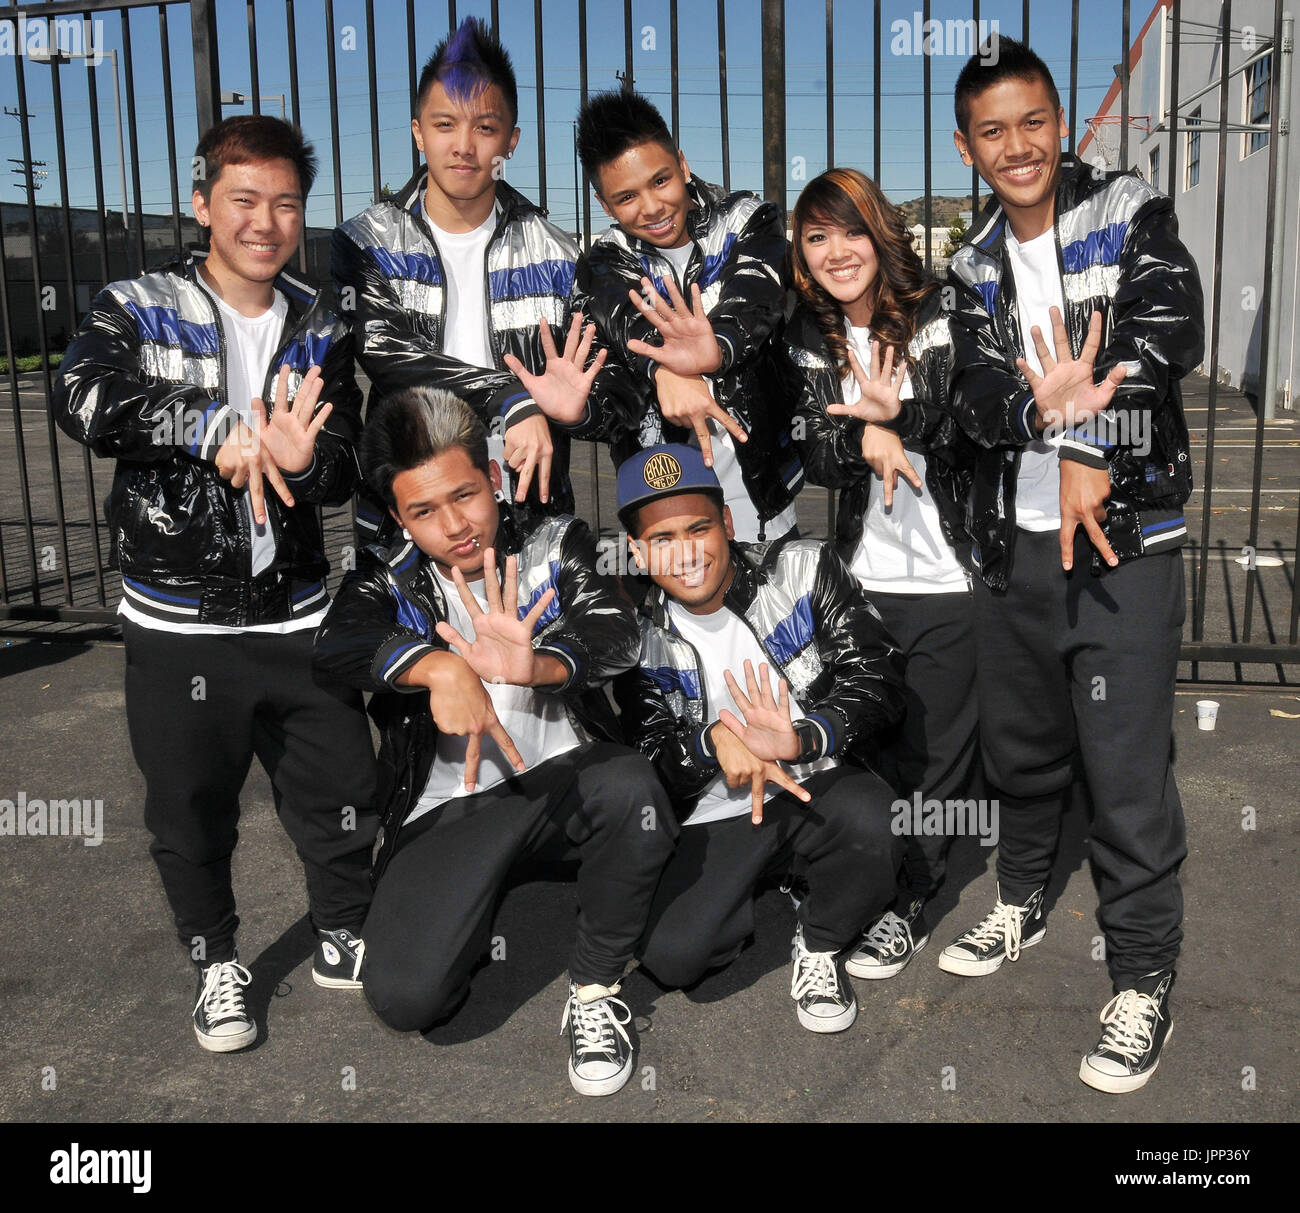 Black Canvas from Hawaii at Randy Jackson's America's Best Dance Crew Season 7 Season Of The Superstars - Los Angeles Auditions at Center Staging in Burbank, CA. The event took place on Saturday, January 28, 2012. Photo by Sthanlee B. Mirador Pacific Rim Photo Press. Stock Photo